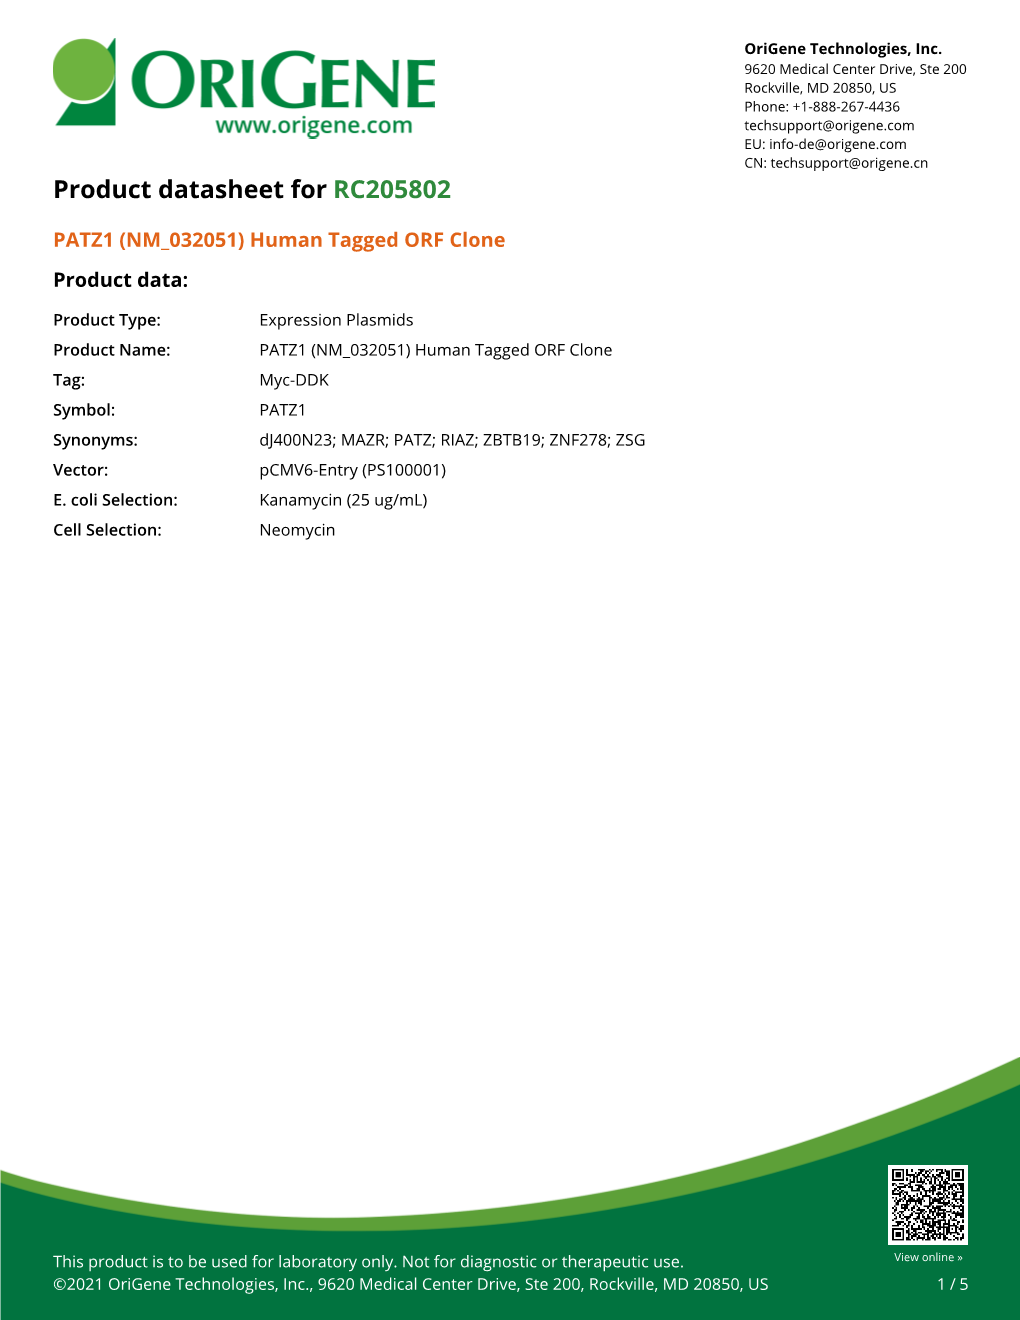 PATZ1 (NM 032051) Human Tagged ORF Clone Product Data